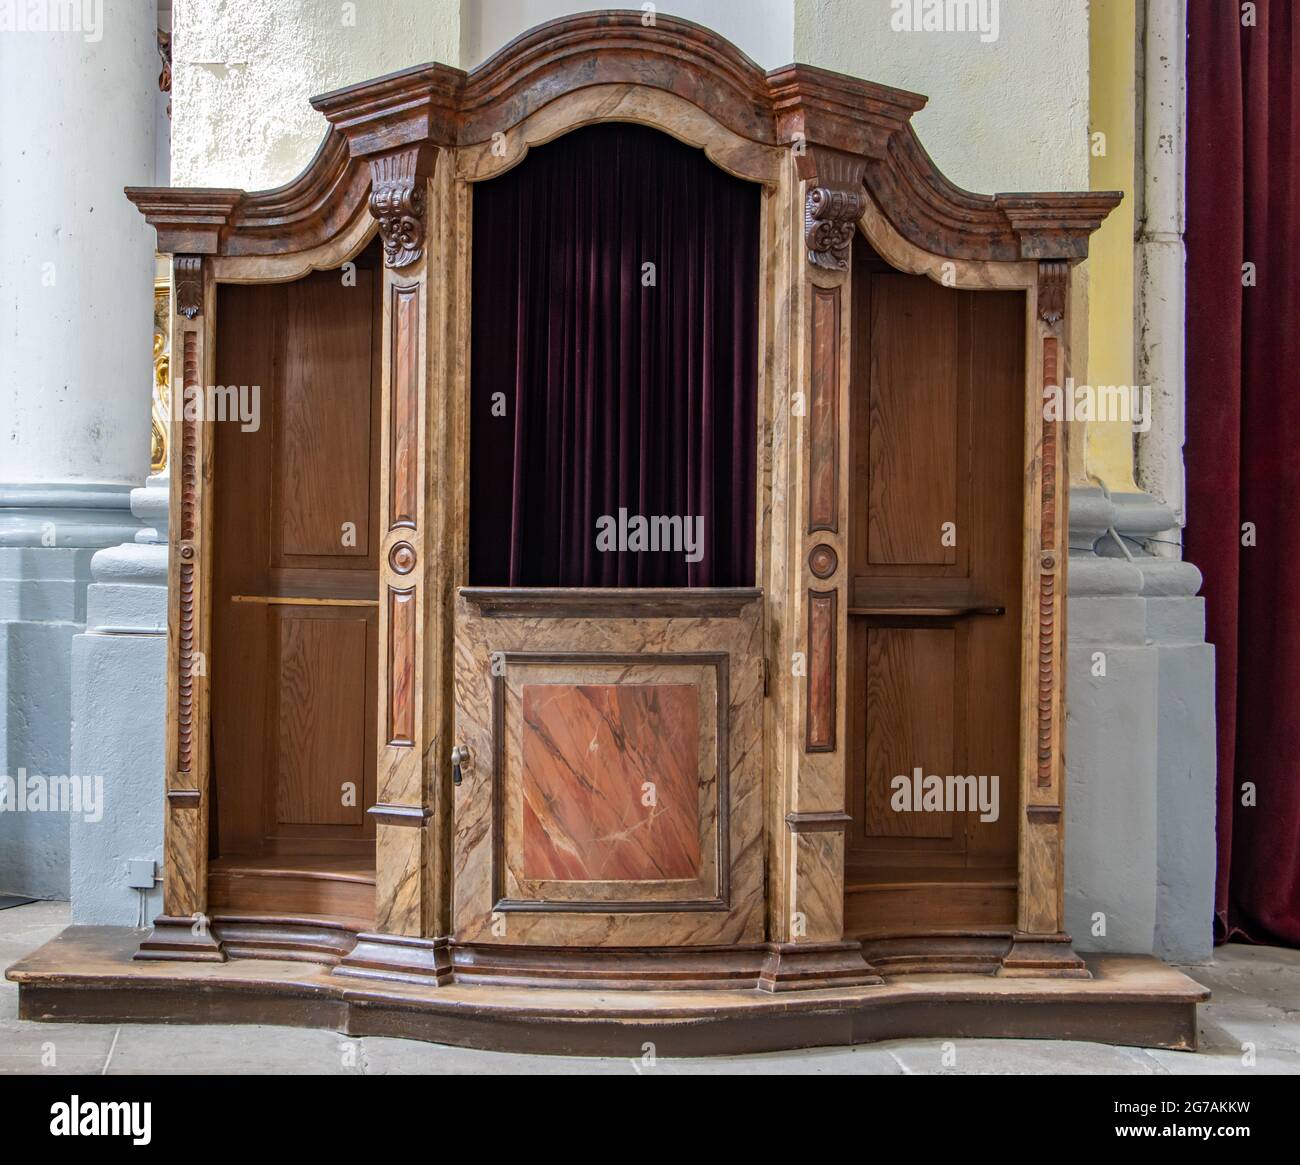 The historical confessional at baroque church. Stock Photo